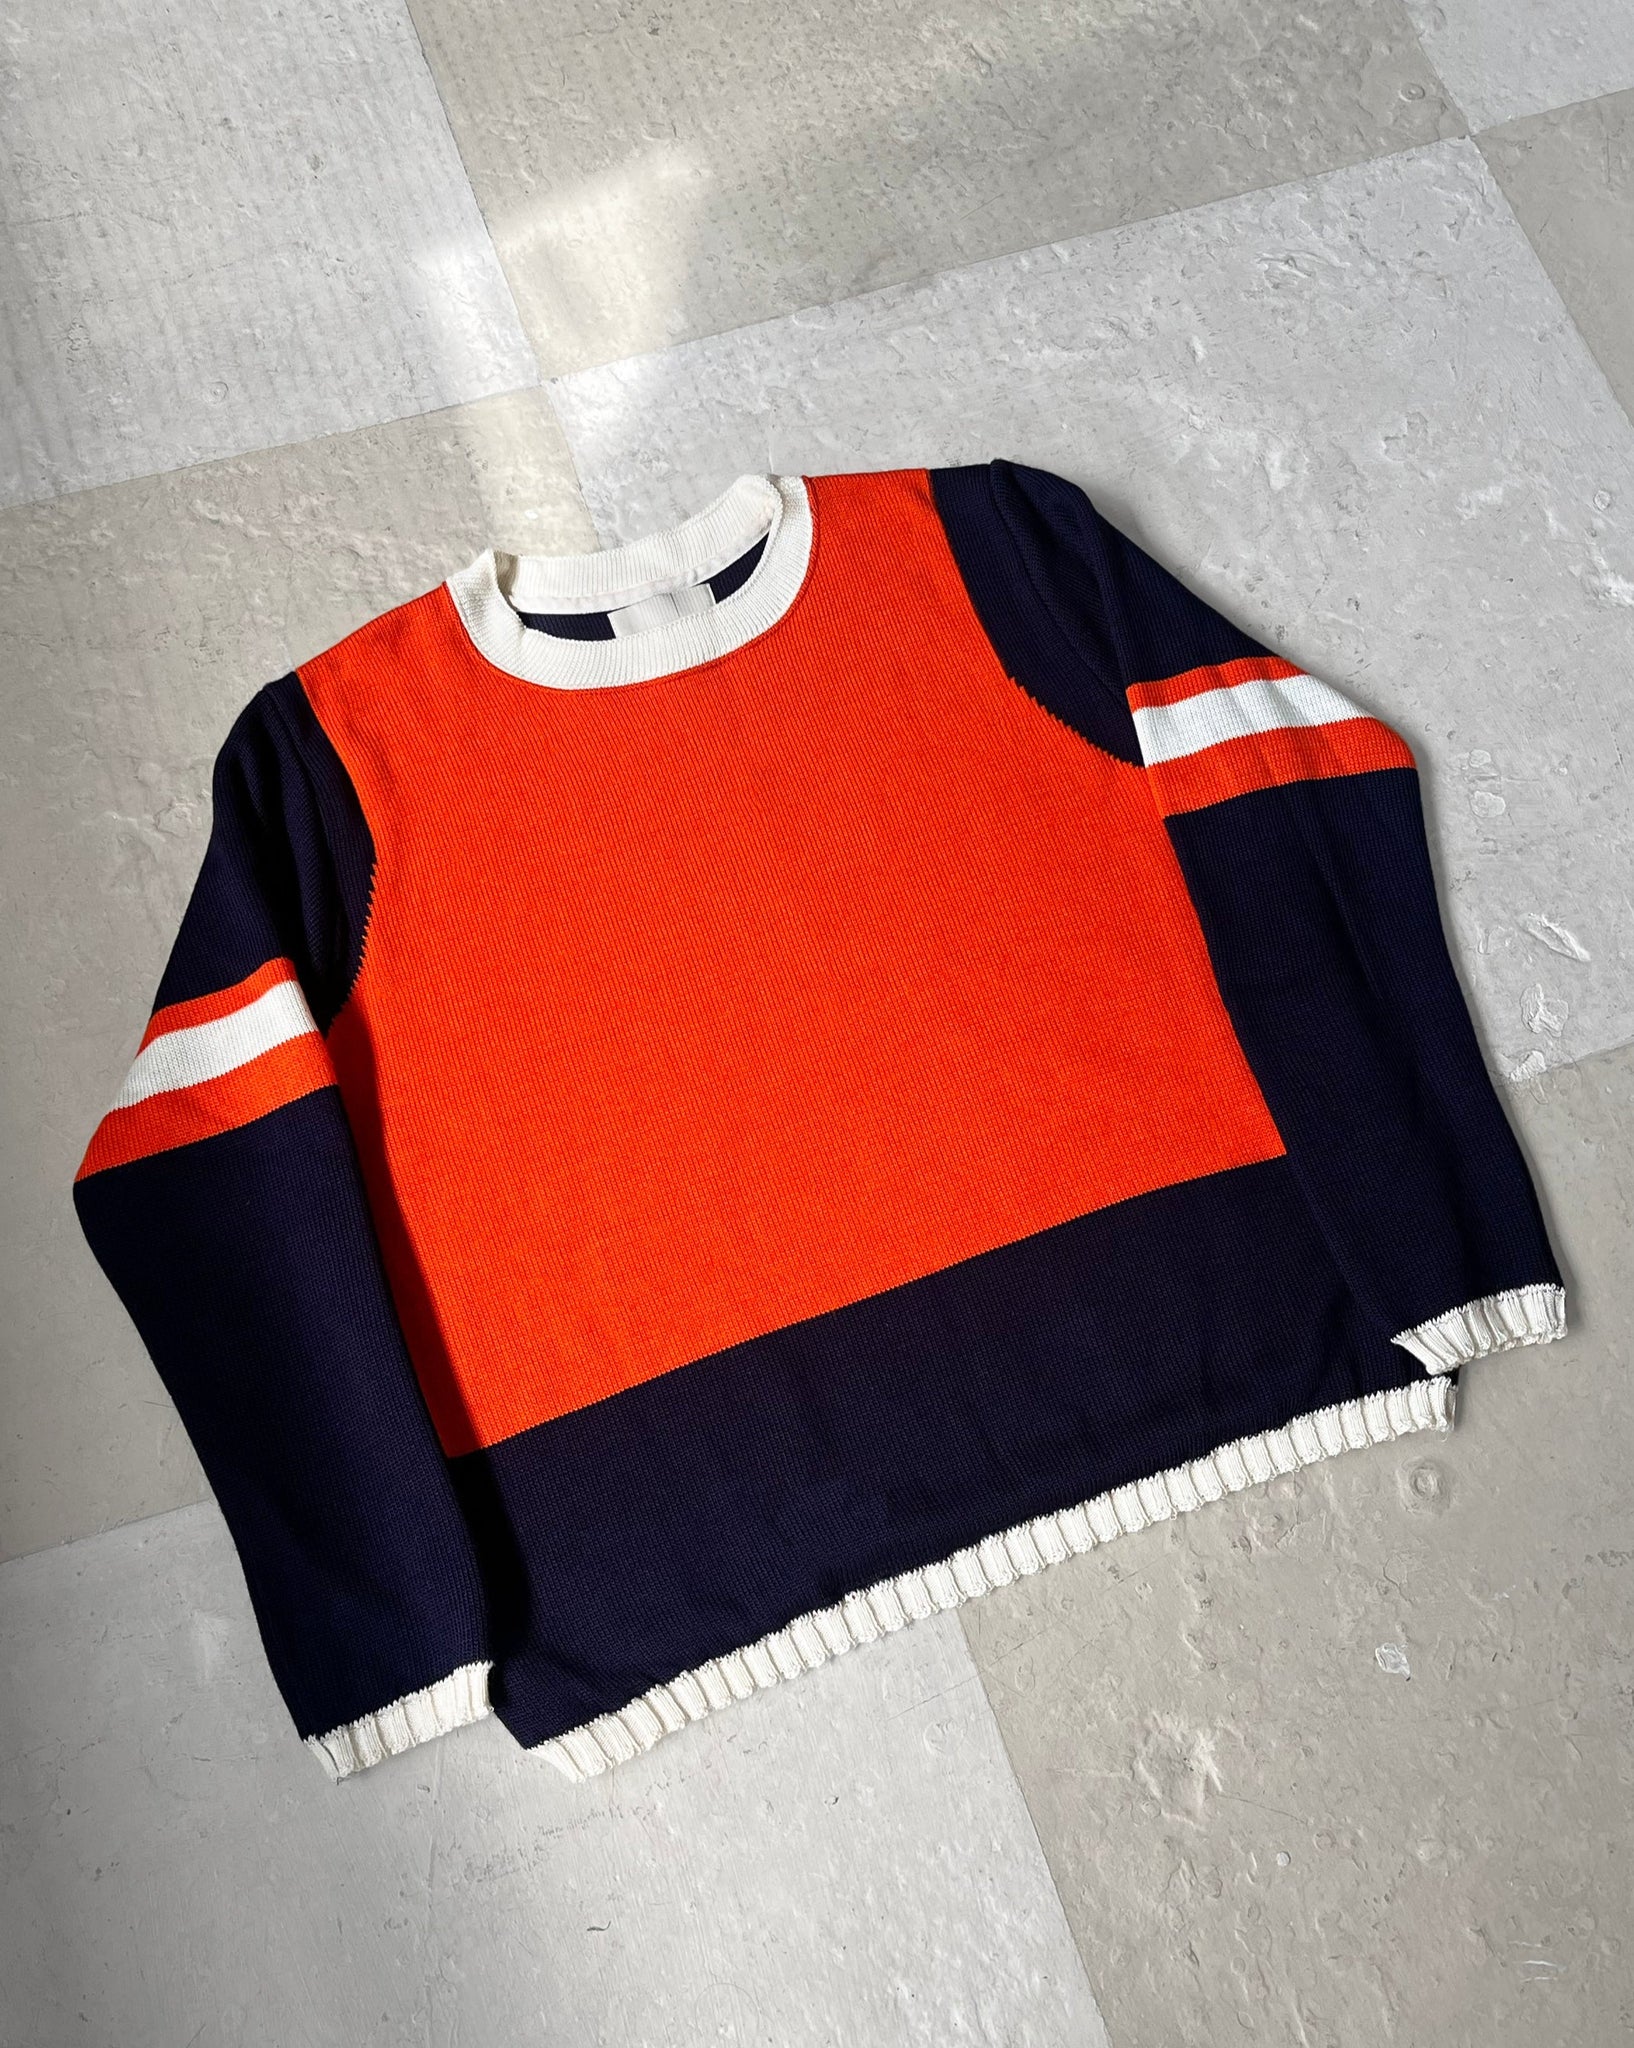 KNIT SCRIMMAGE SWEATER